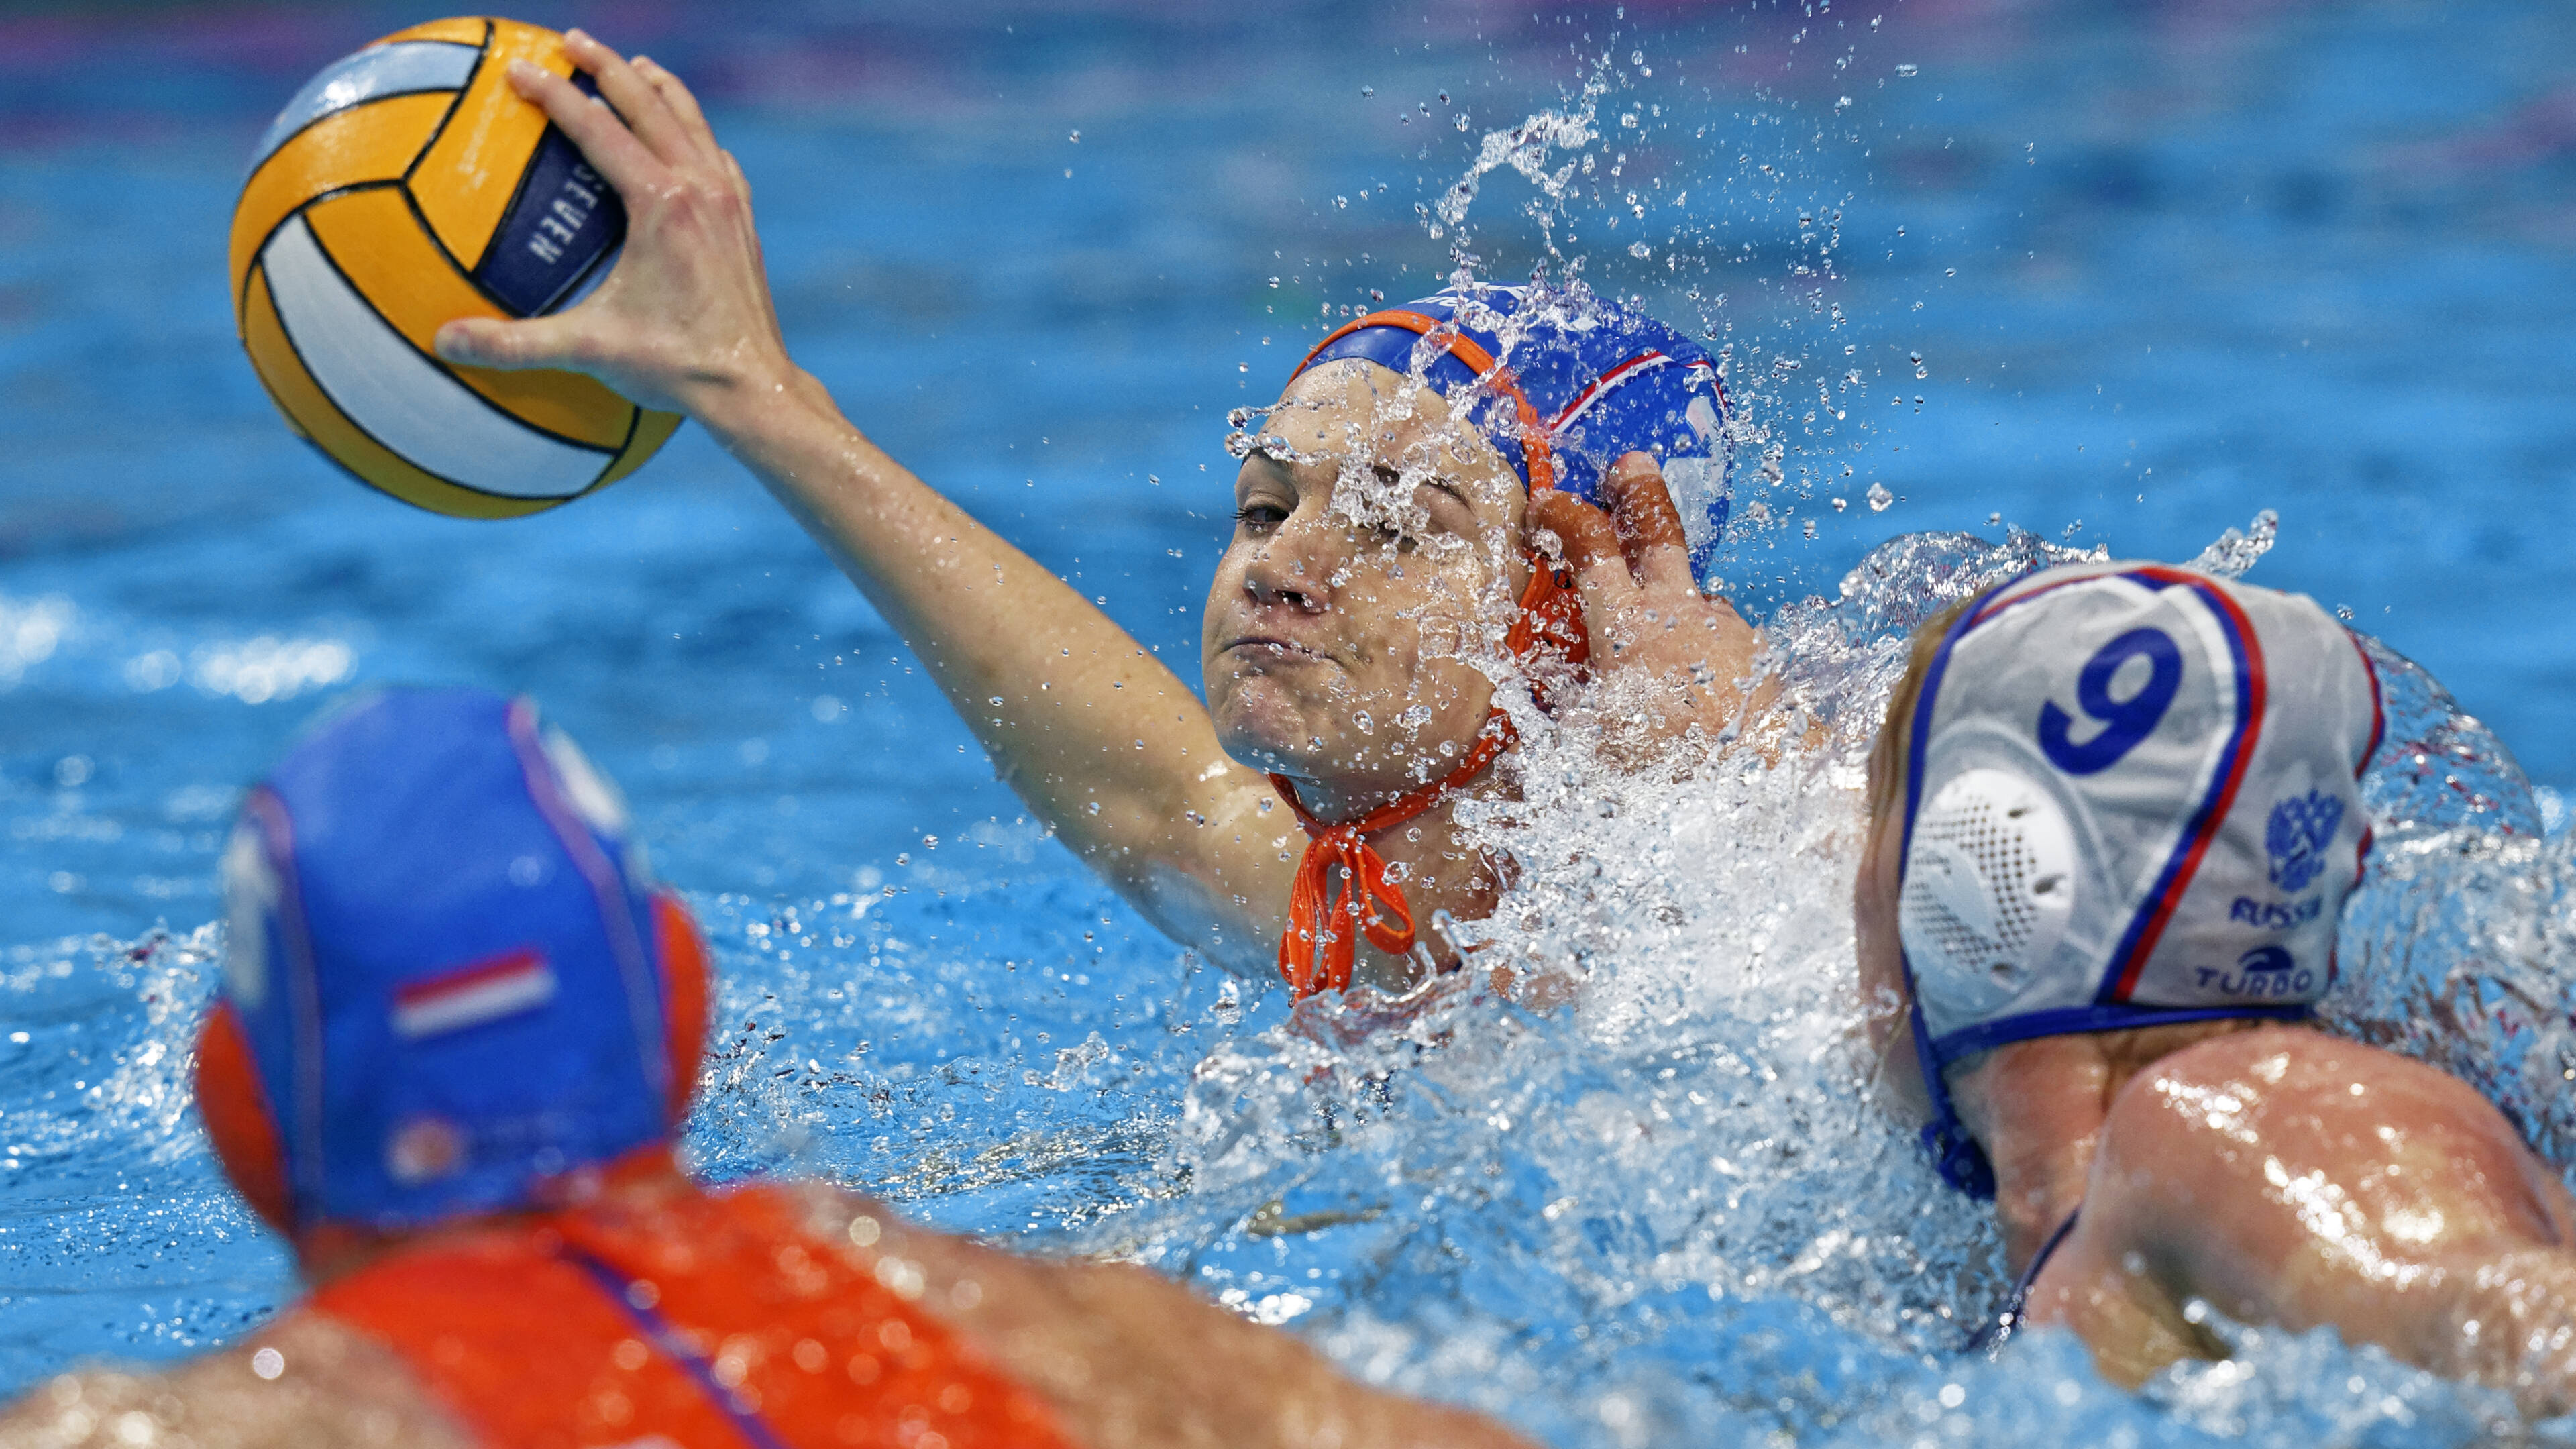 Water Polo: 2020 European Water Polo Championship in the Netherlands, Semi-final game. 3840x2160 4K Wallpaper.